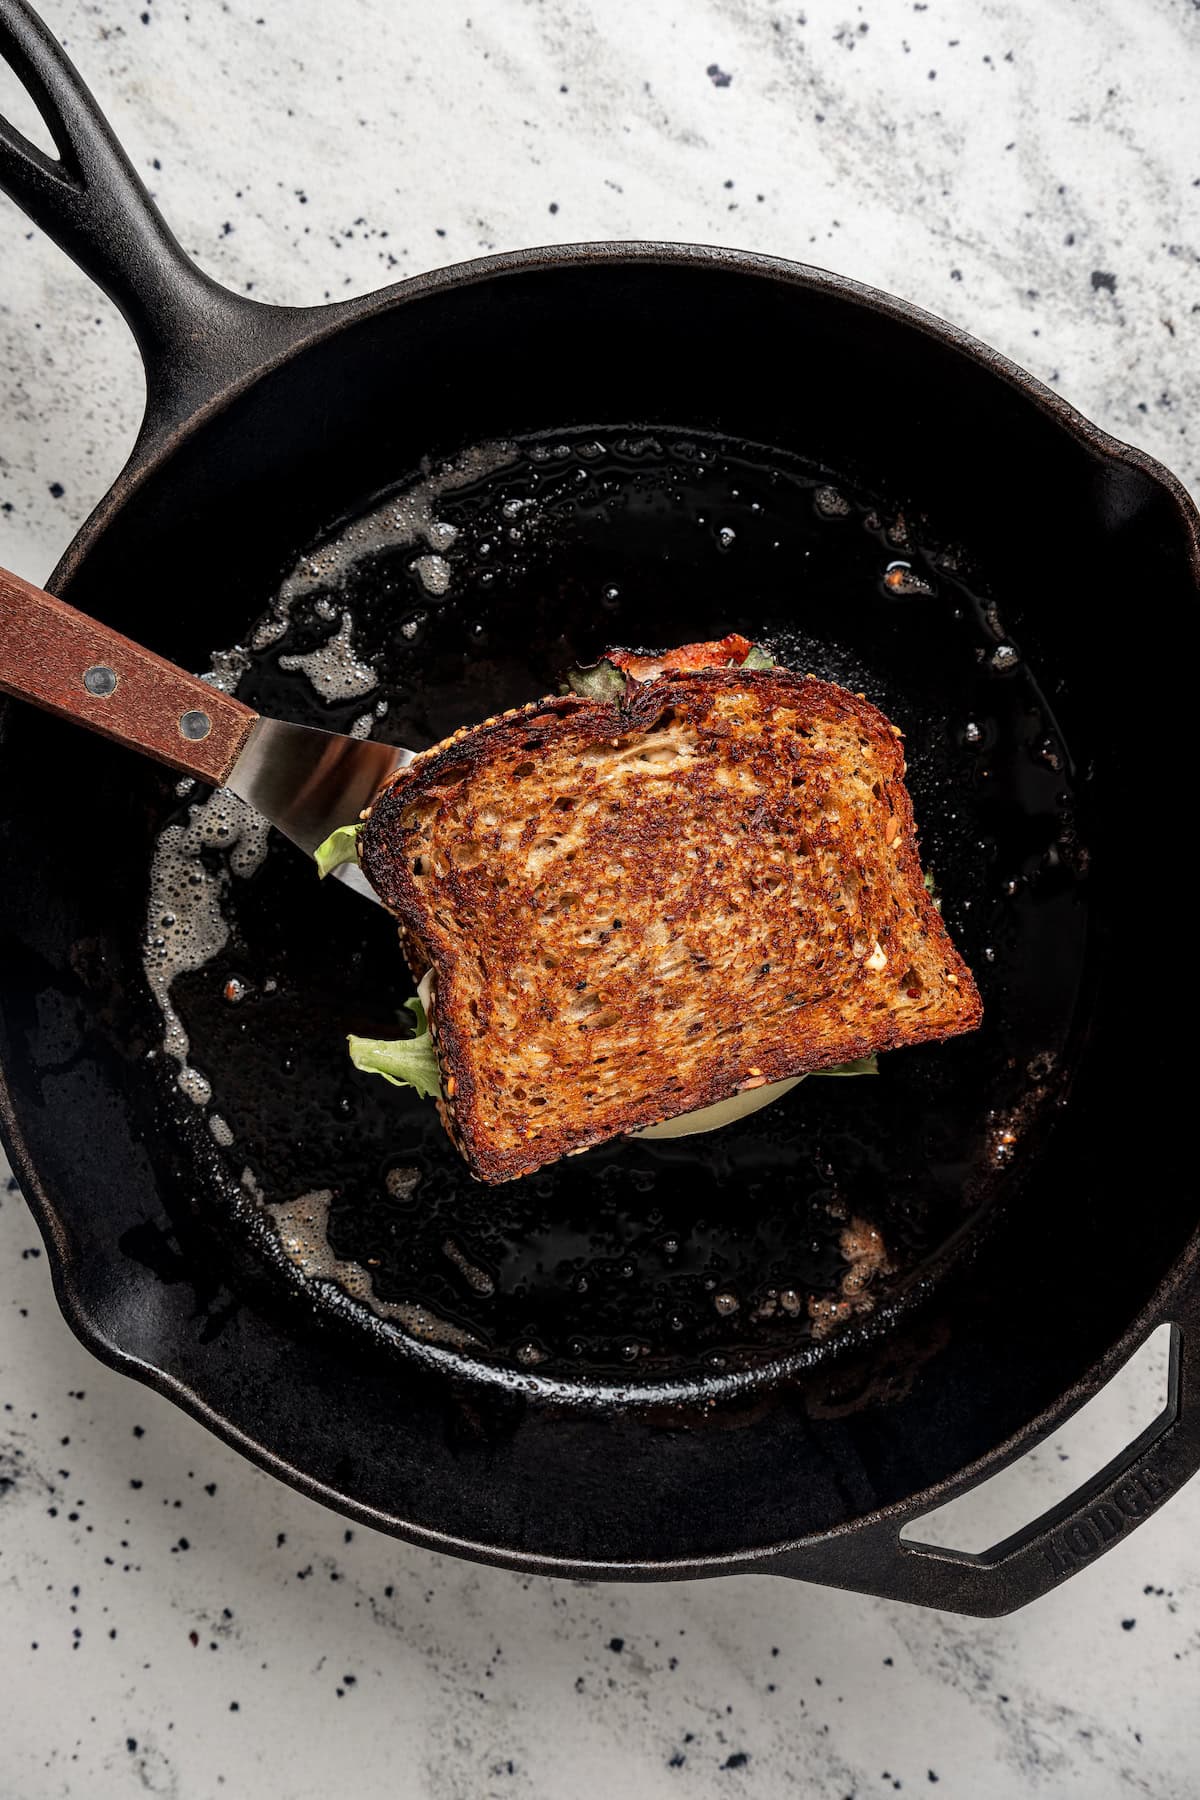 Grilling a bacon, egg, and cheese grilled cheese in a skillet.